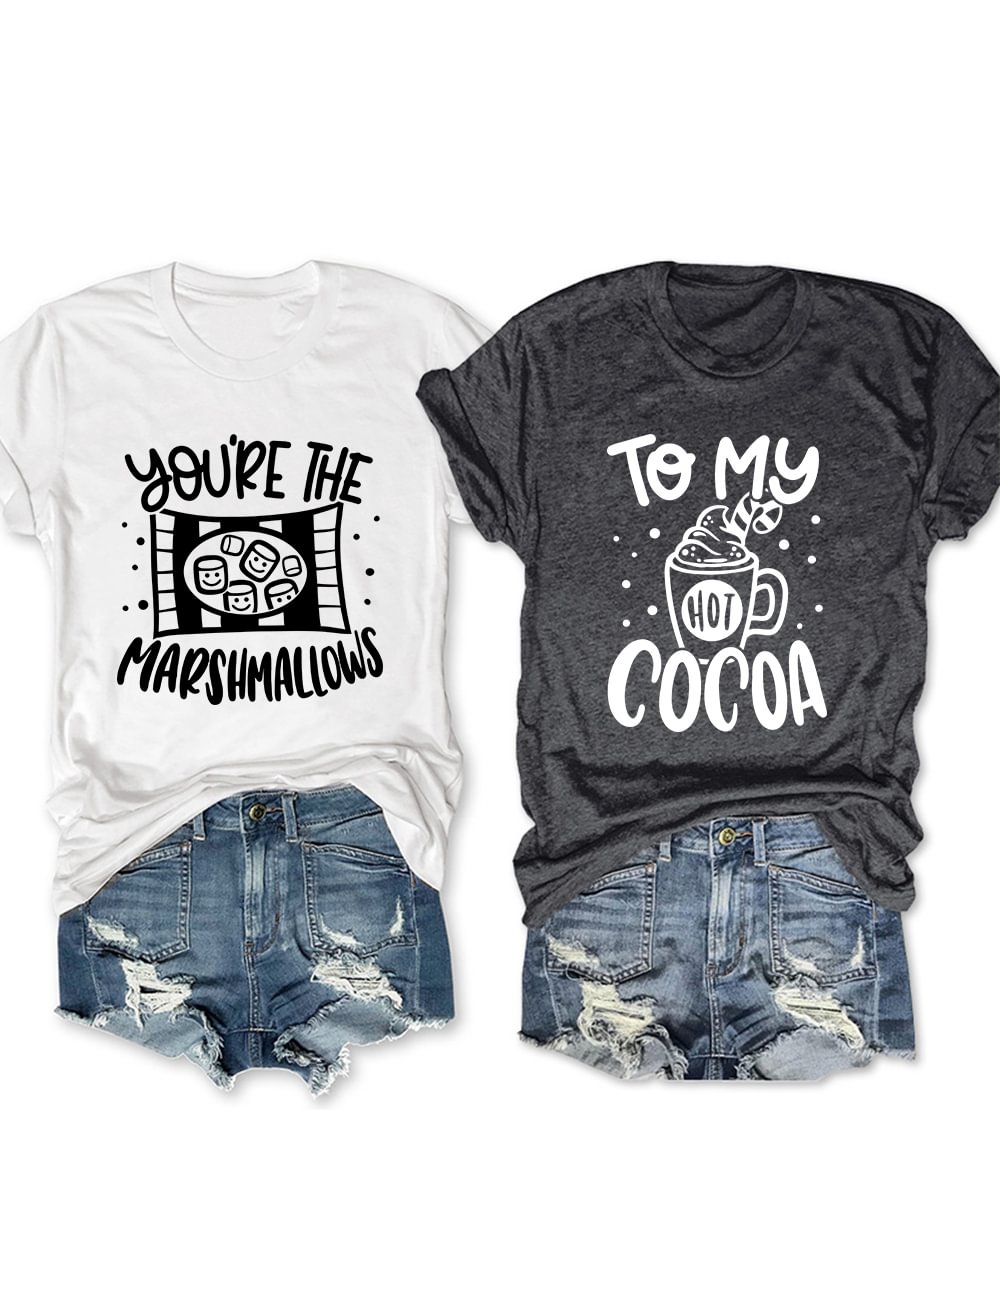 You're the Marshmallows To My Hot Cocoa T-Shirt